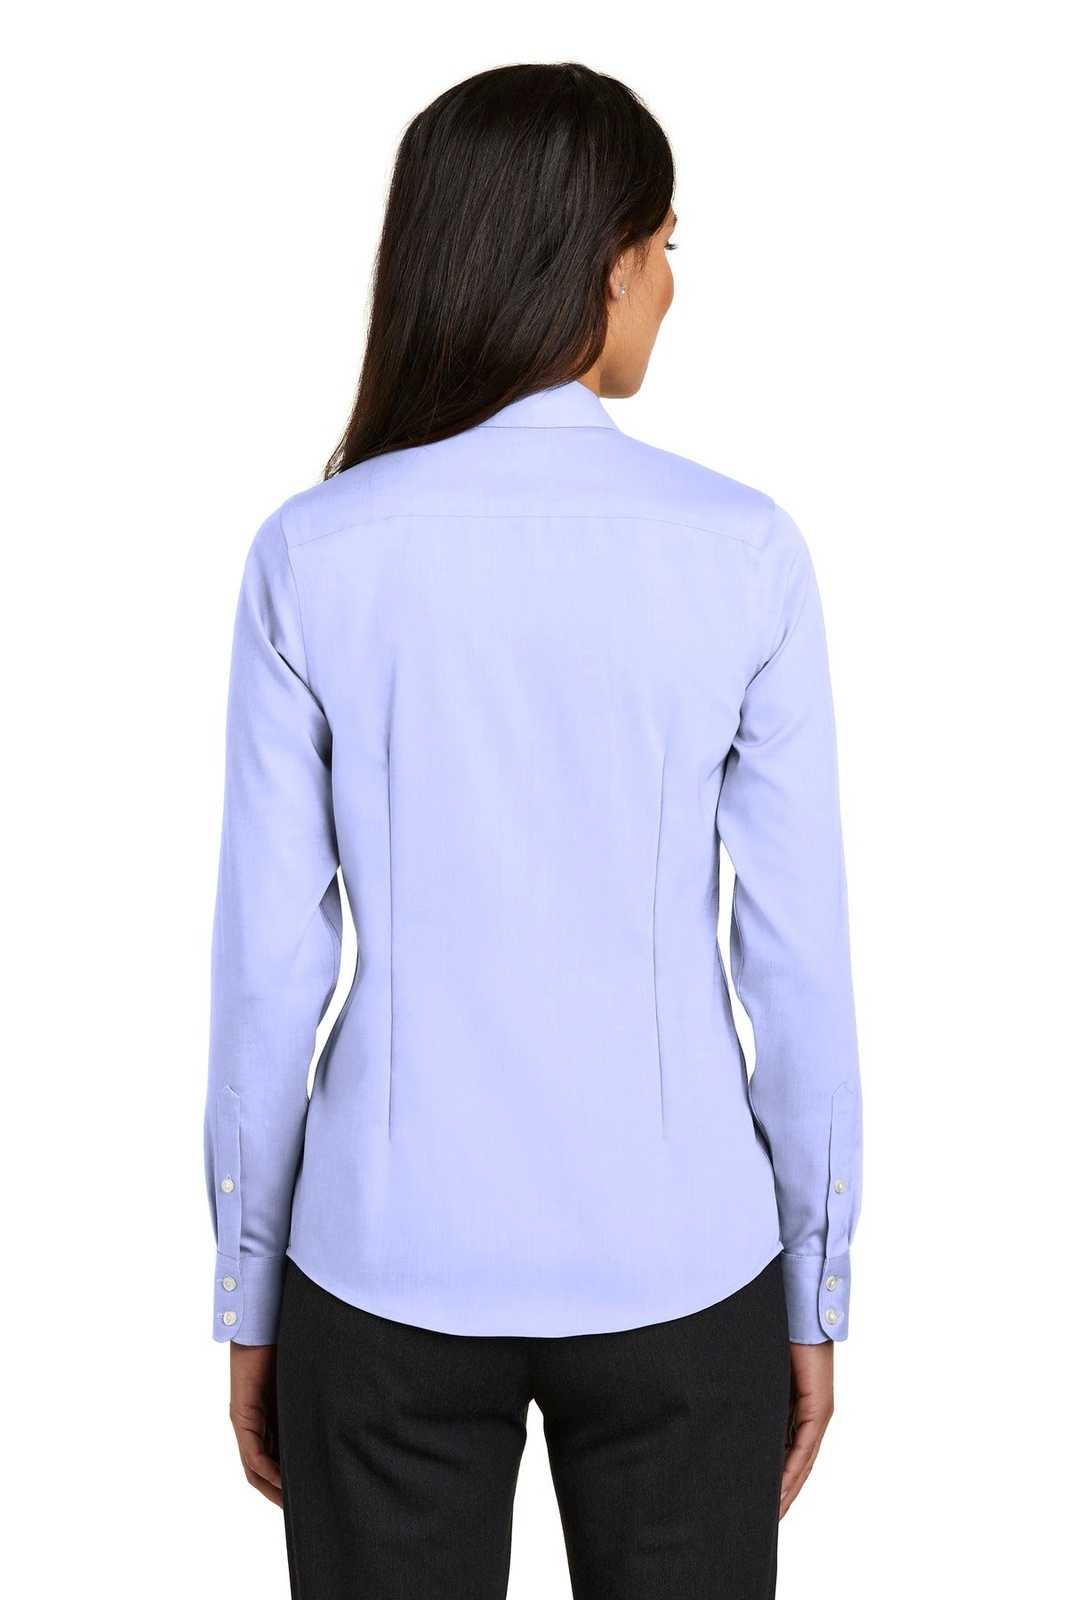 Red House RH250 Ladies Pinpoint Oxford Non-Iron Shirt - Blue - HIT a Double - 2